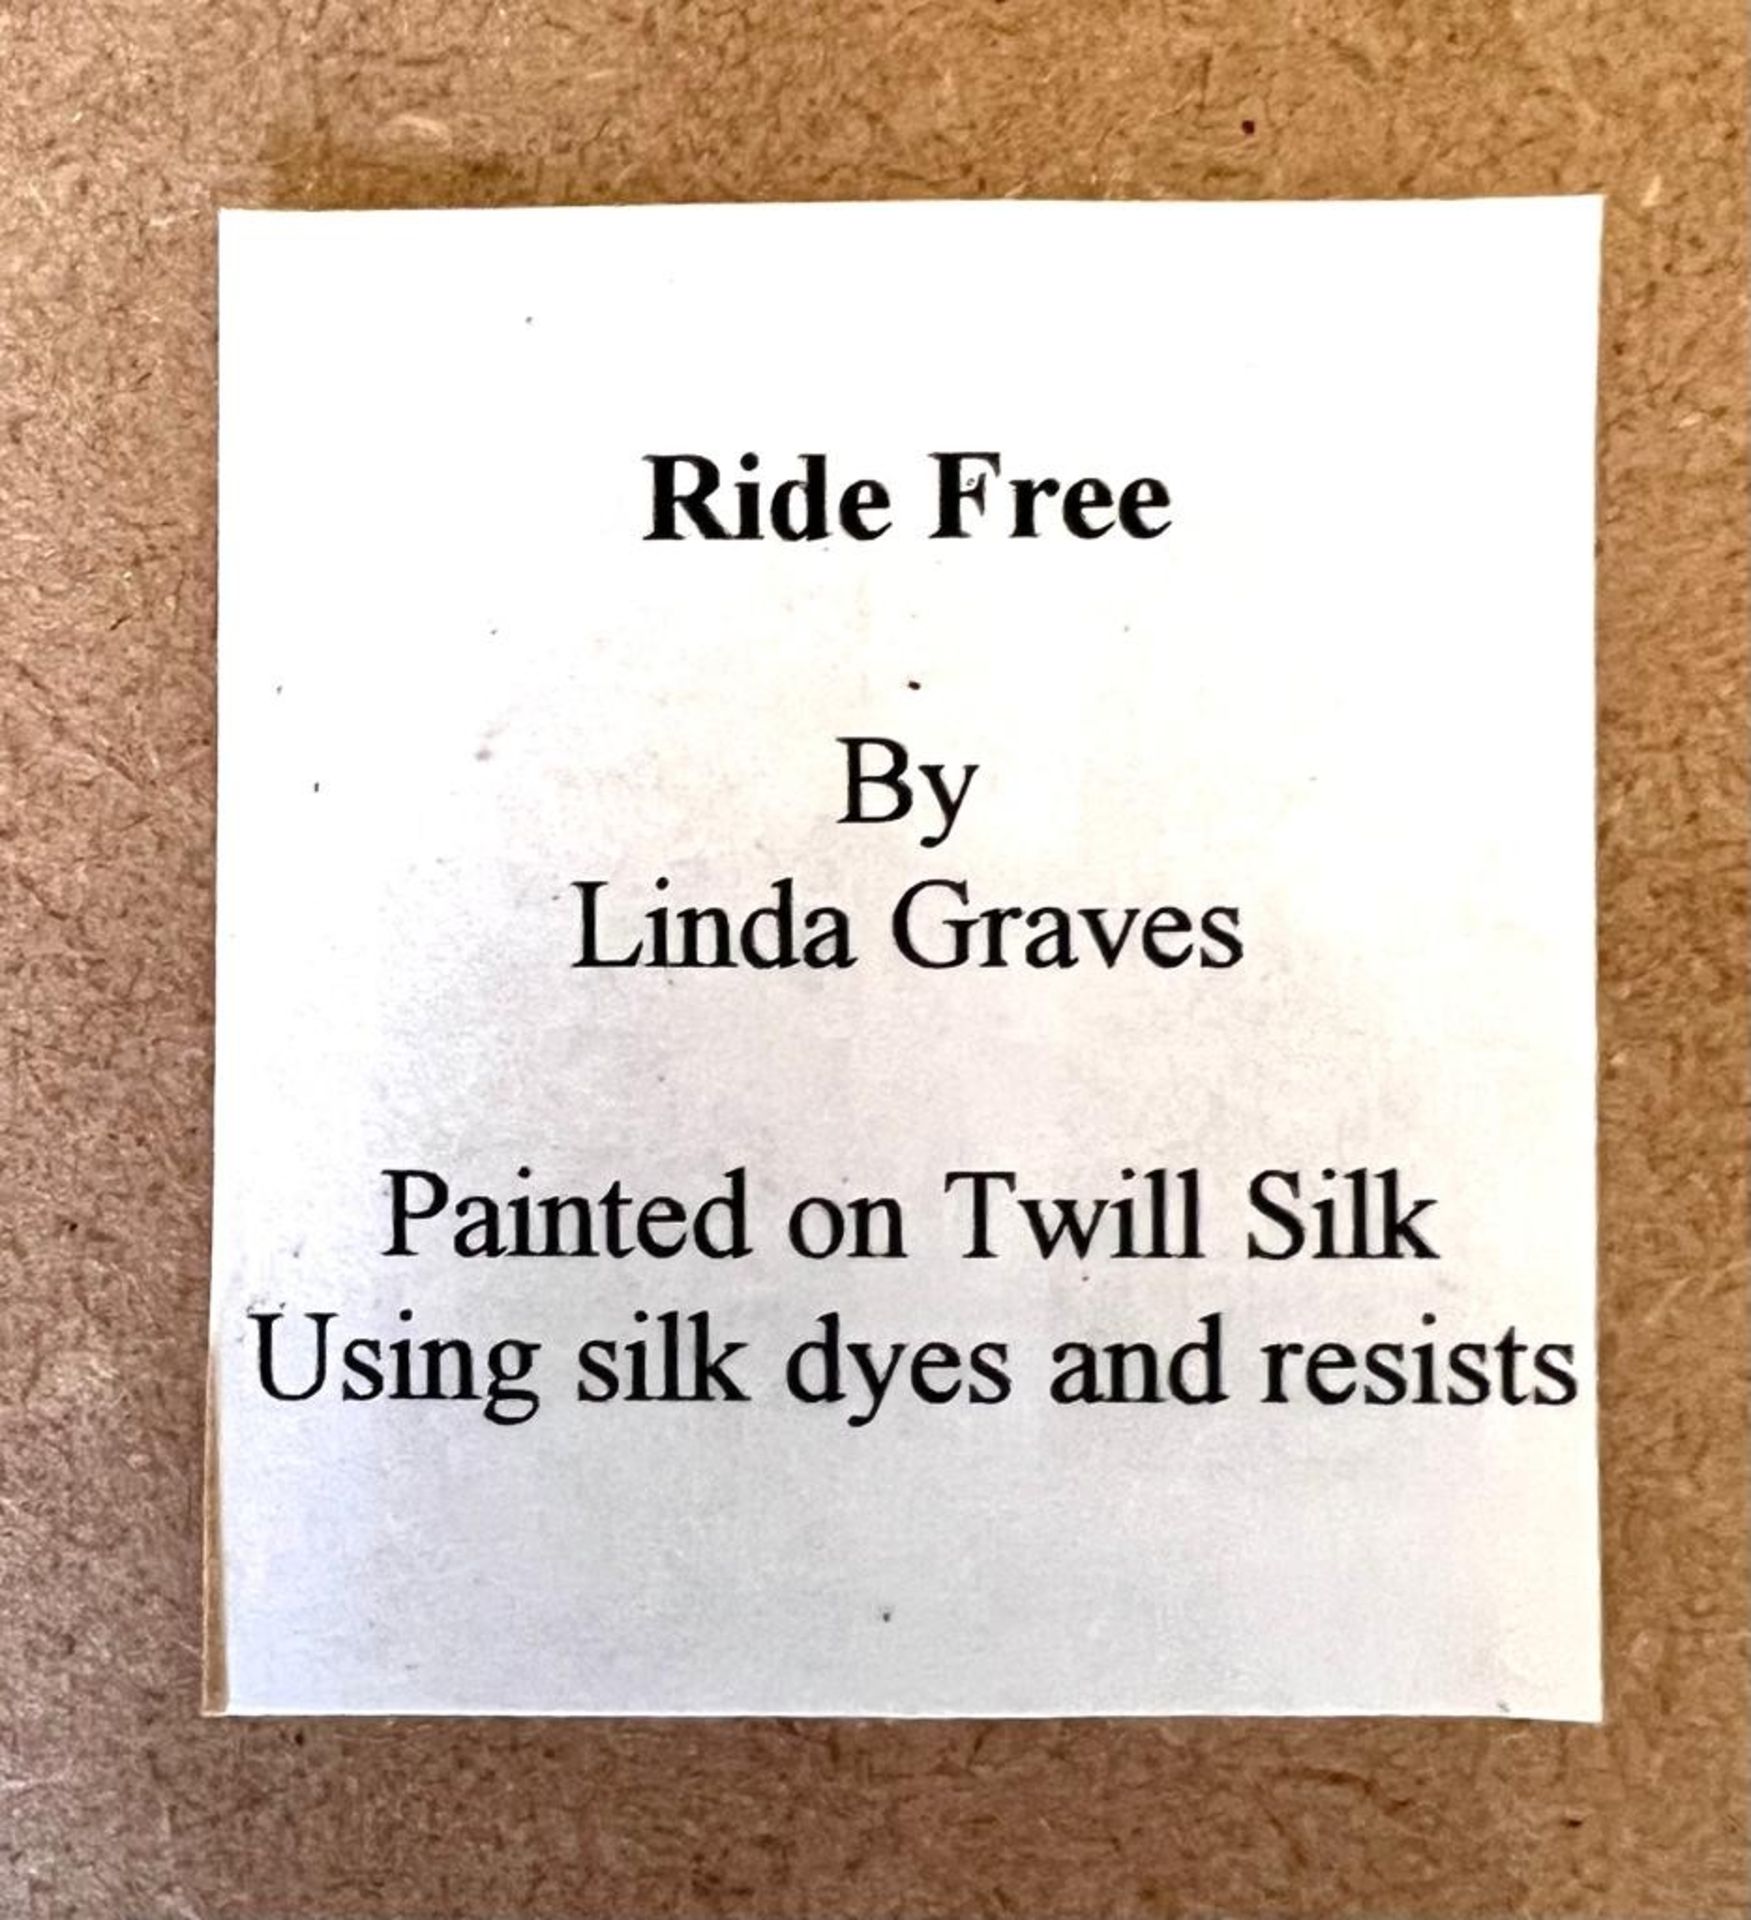 LINDA GRAVES, 'RIDE FREE', PAINTED ON TWILL SILK, COPPERY COLOURED FRAME, GLAZED, APPROX 33.5 x 48cm - Image 4 of 4